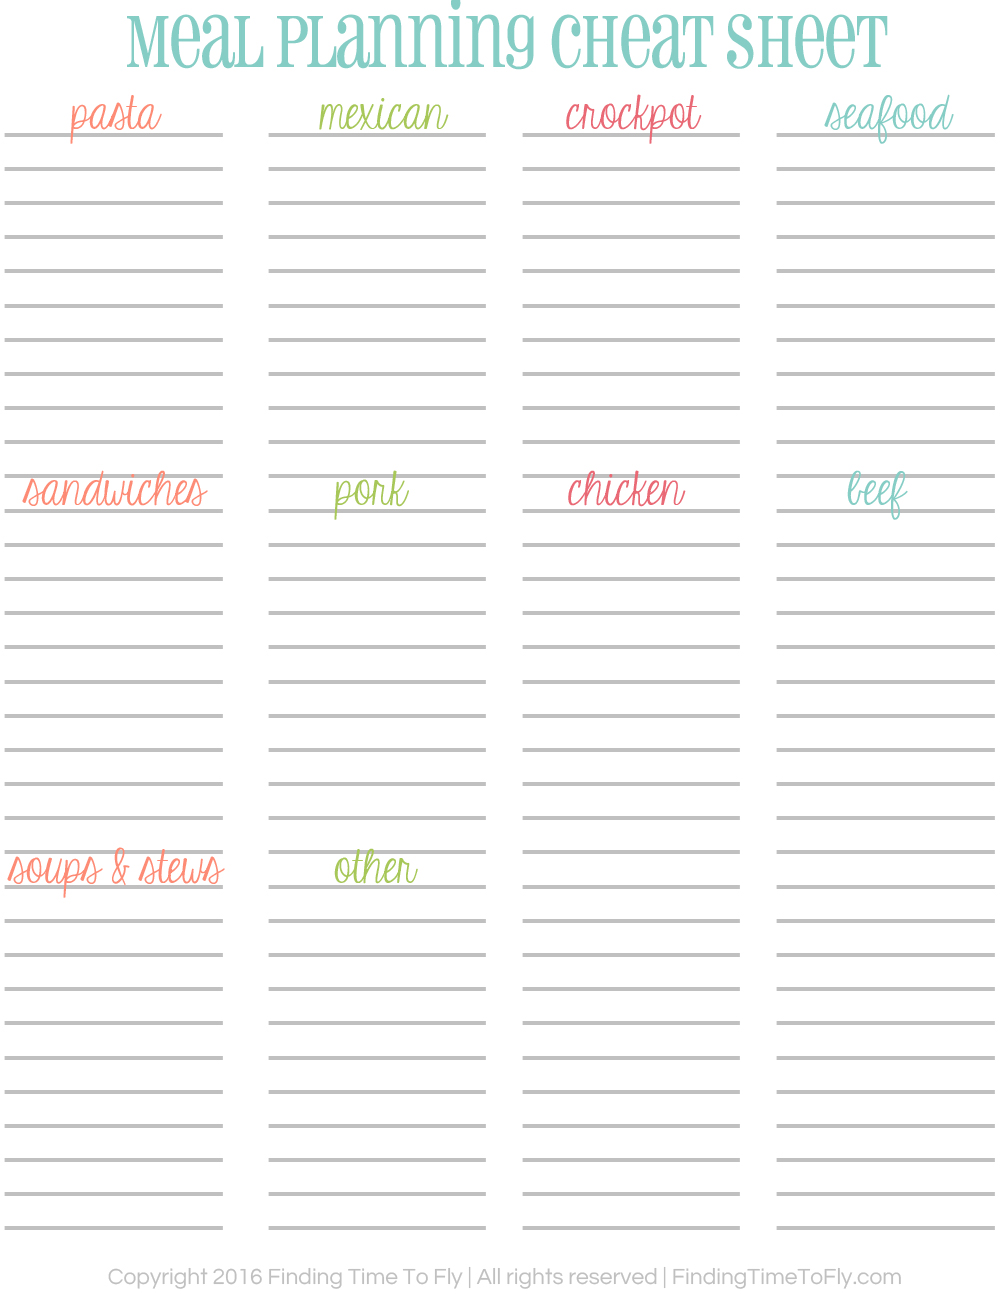 This Meal Planning Cheat Sheet is the BEST tool to organize your weeknight dinners. All you have to do is round up your family's favorite recipes, then get planning!